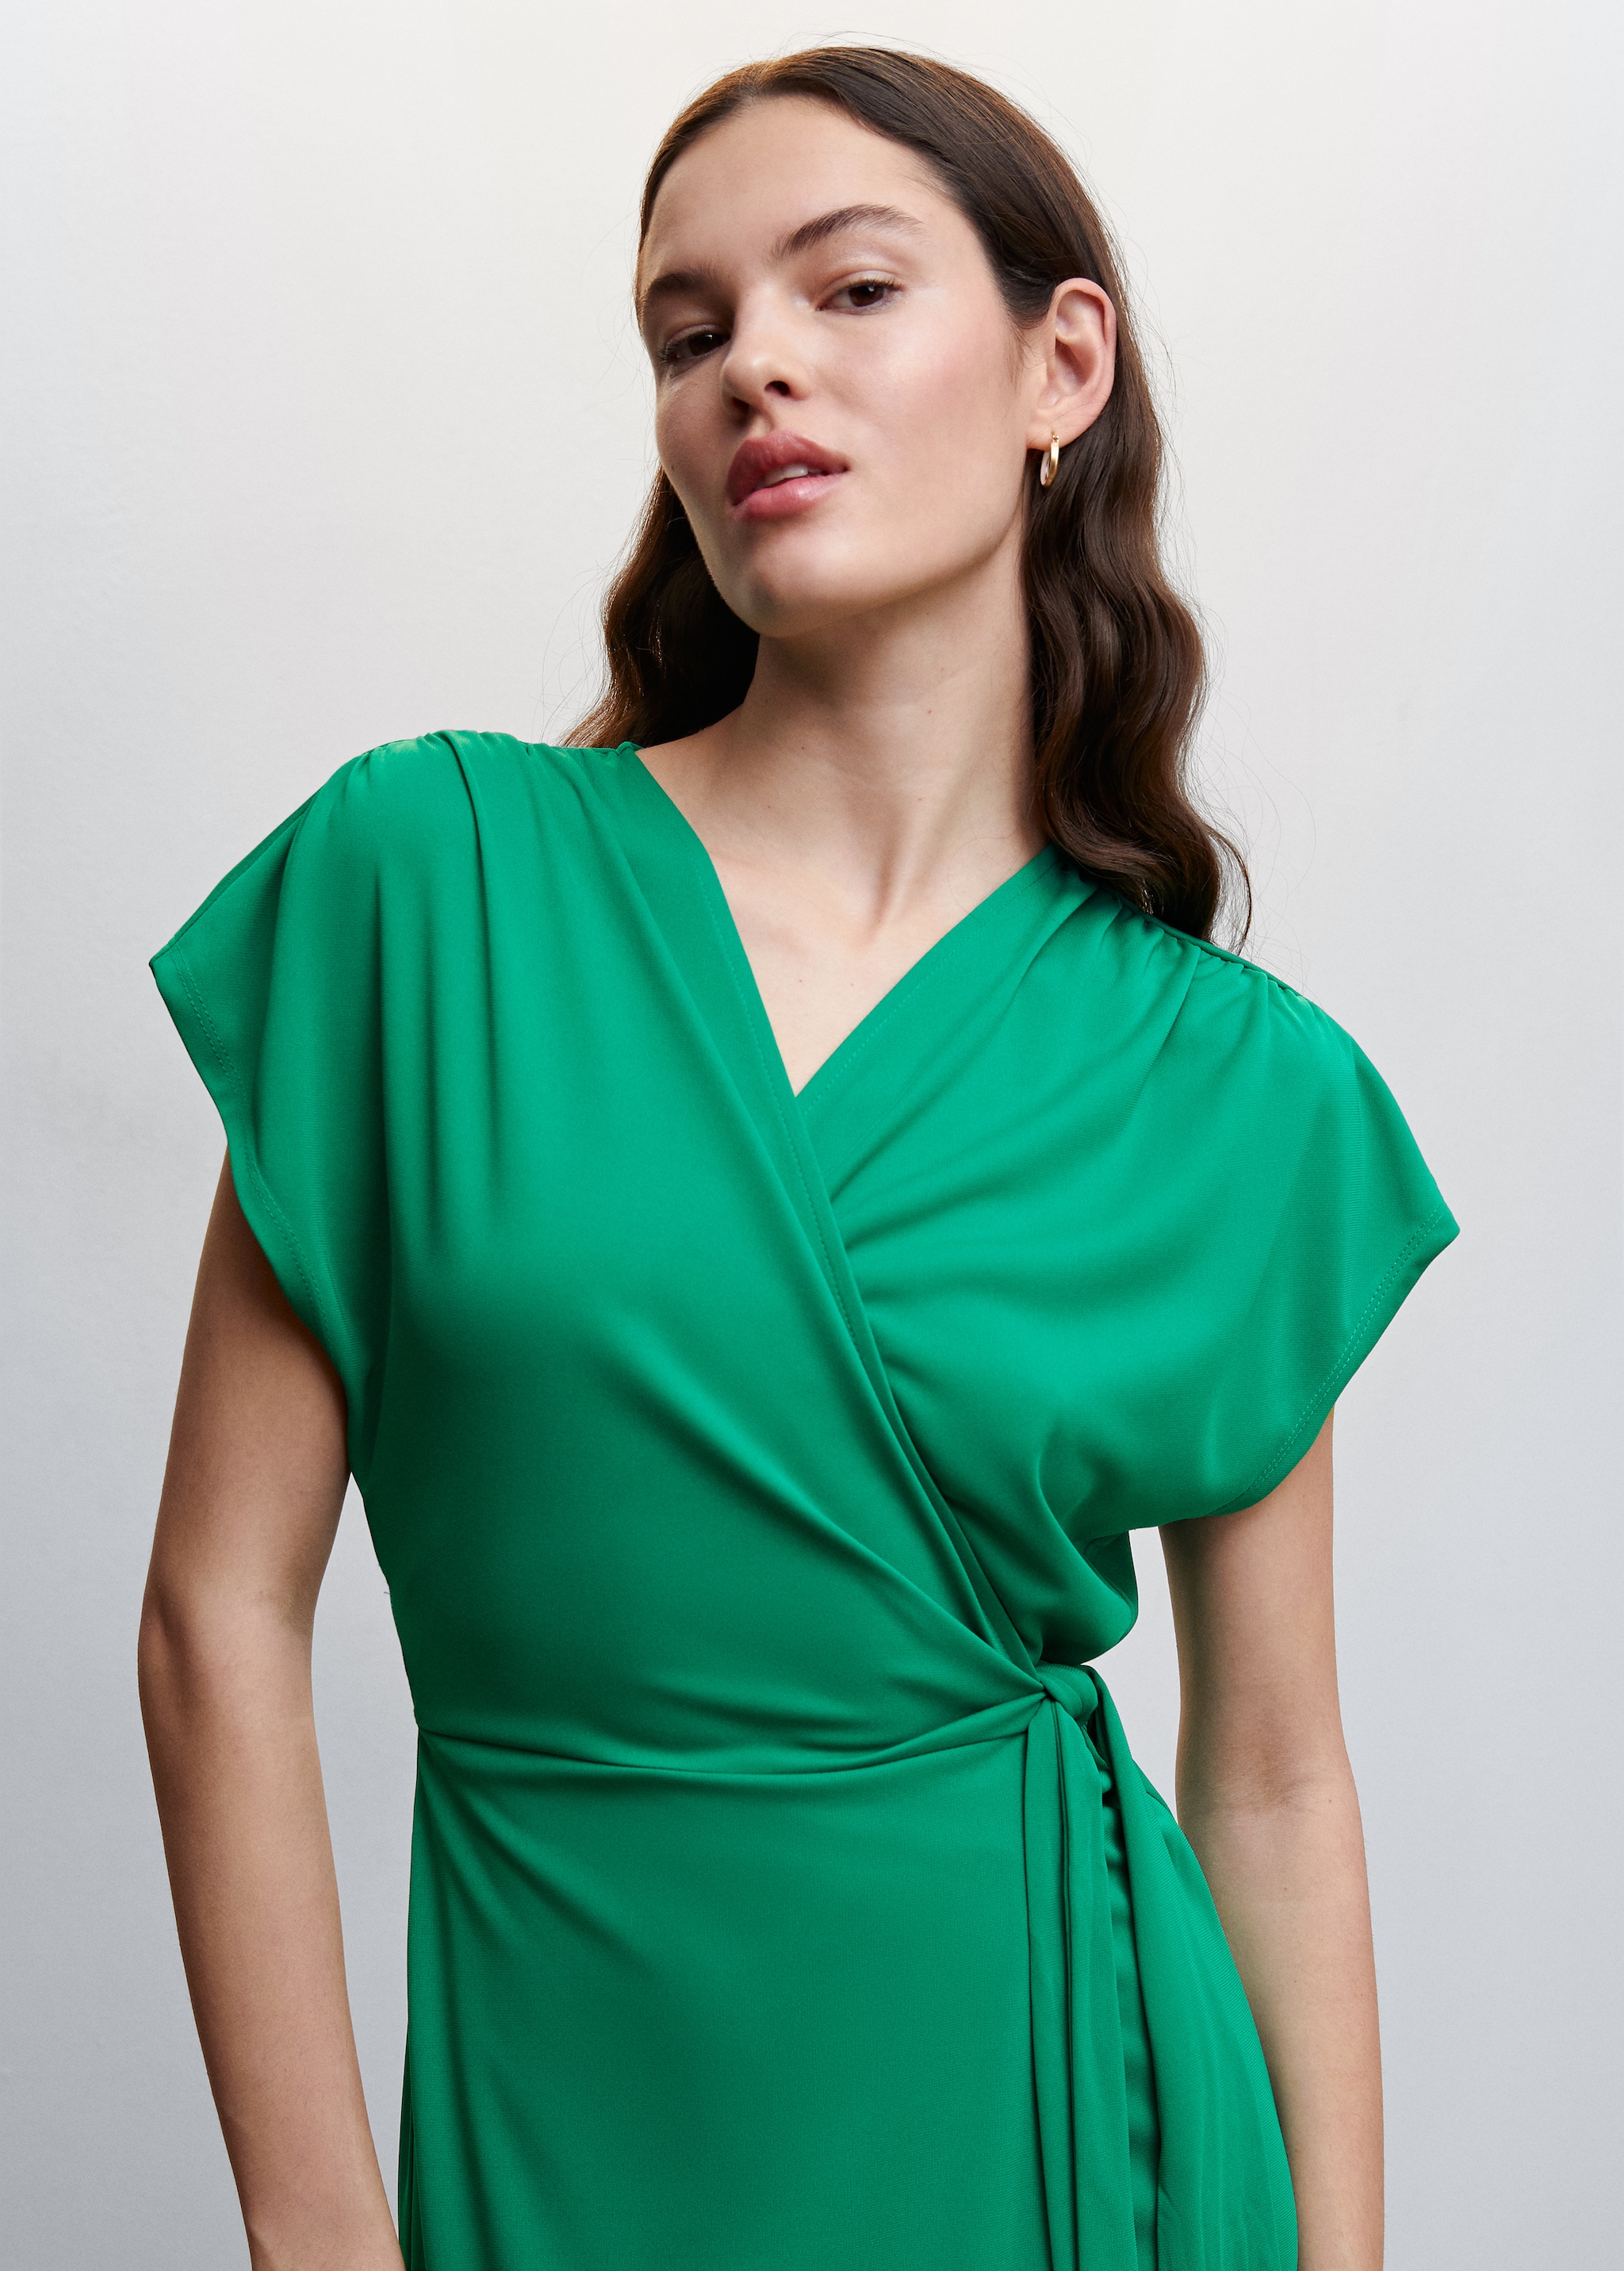 Bow wrap dress - Details of the article 1